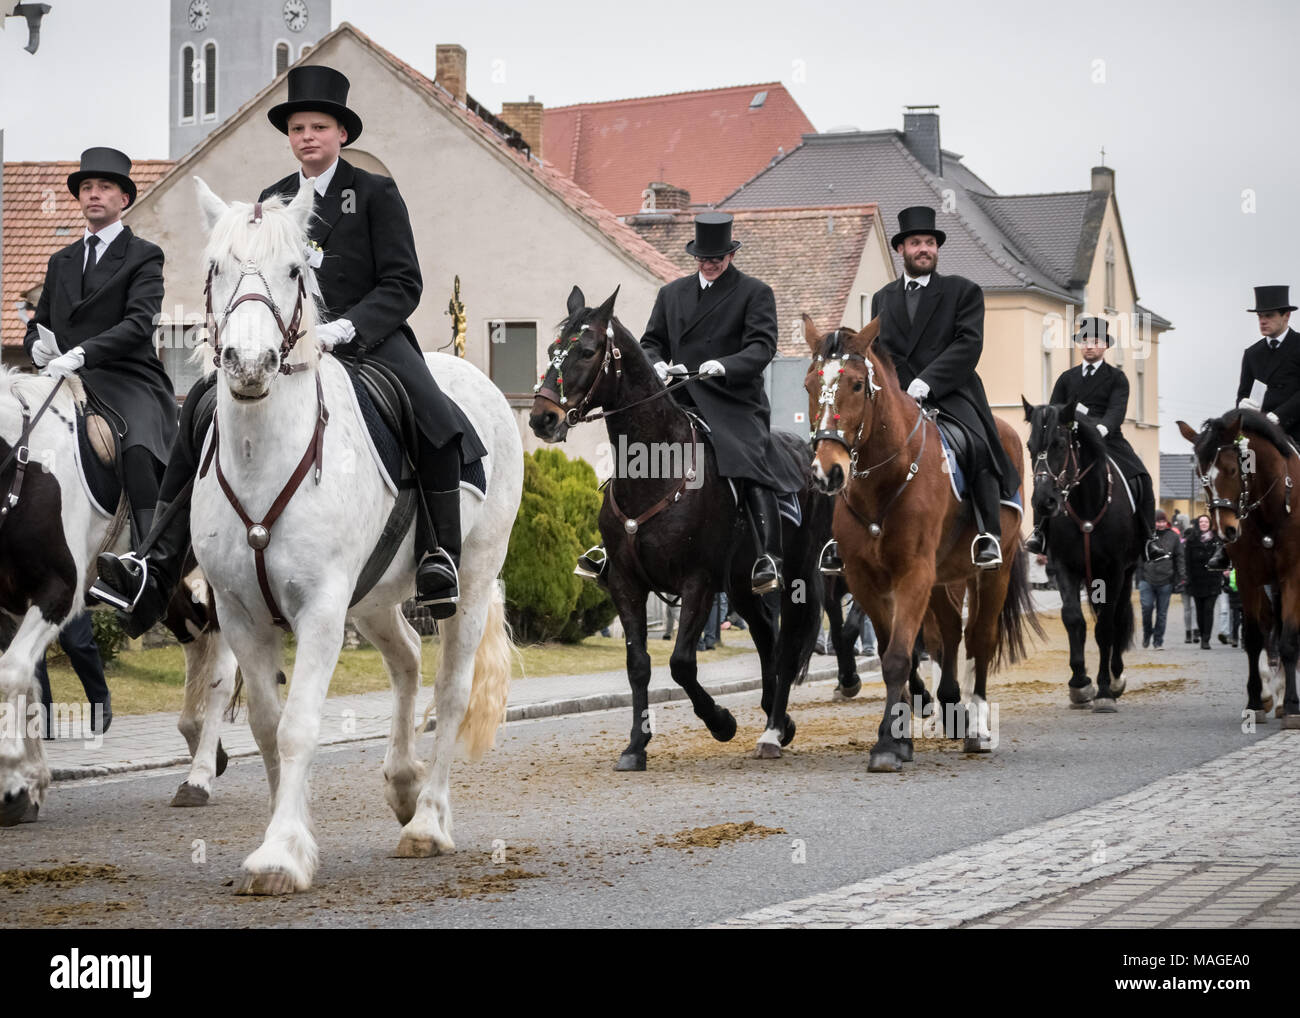 Lausitz, Germany. 1st Apr, 2018. Close up of a group of Easter riders (Osterreiter) in Ralbitz Credit: Krino/Alamy Live News Stock Photo